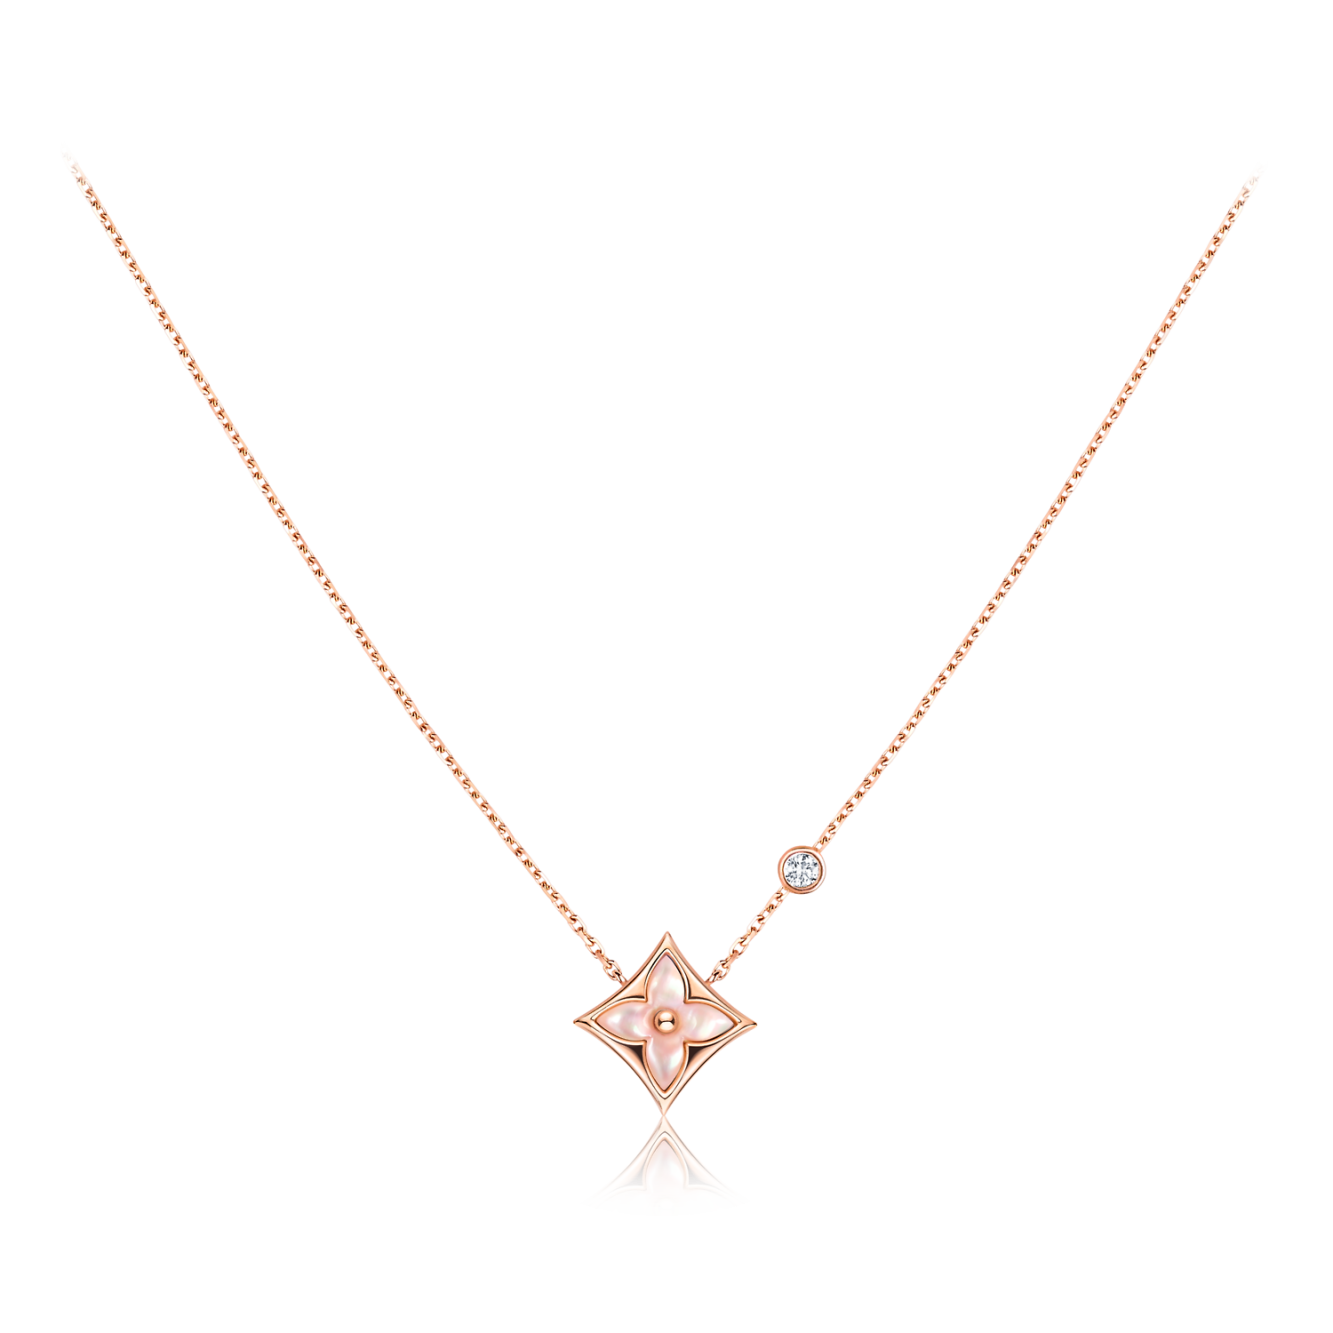 Louis Vuitton pre-owned 18kt Rose Gold Star Blossom Diamond